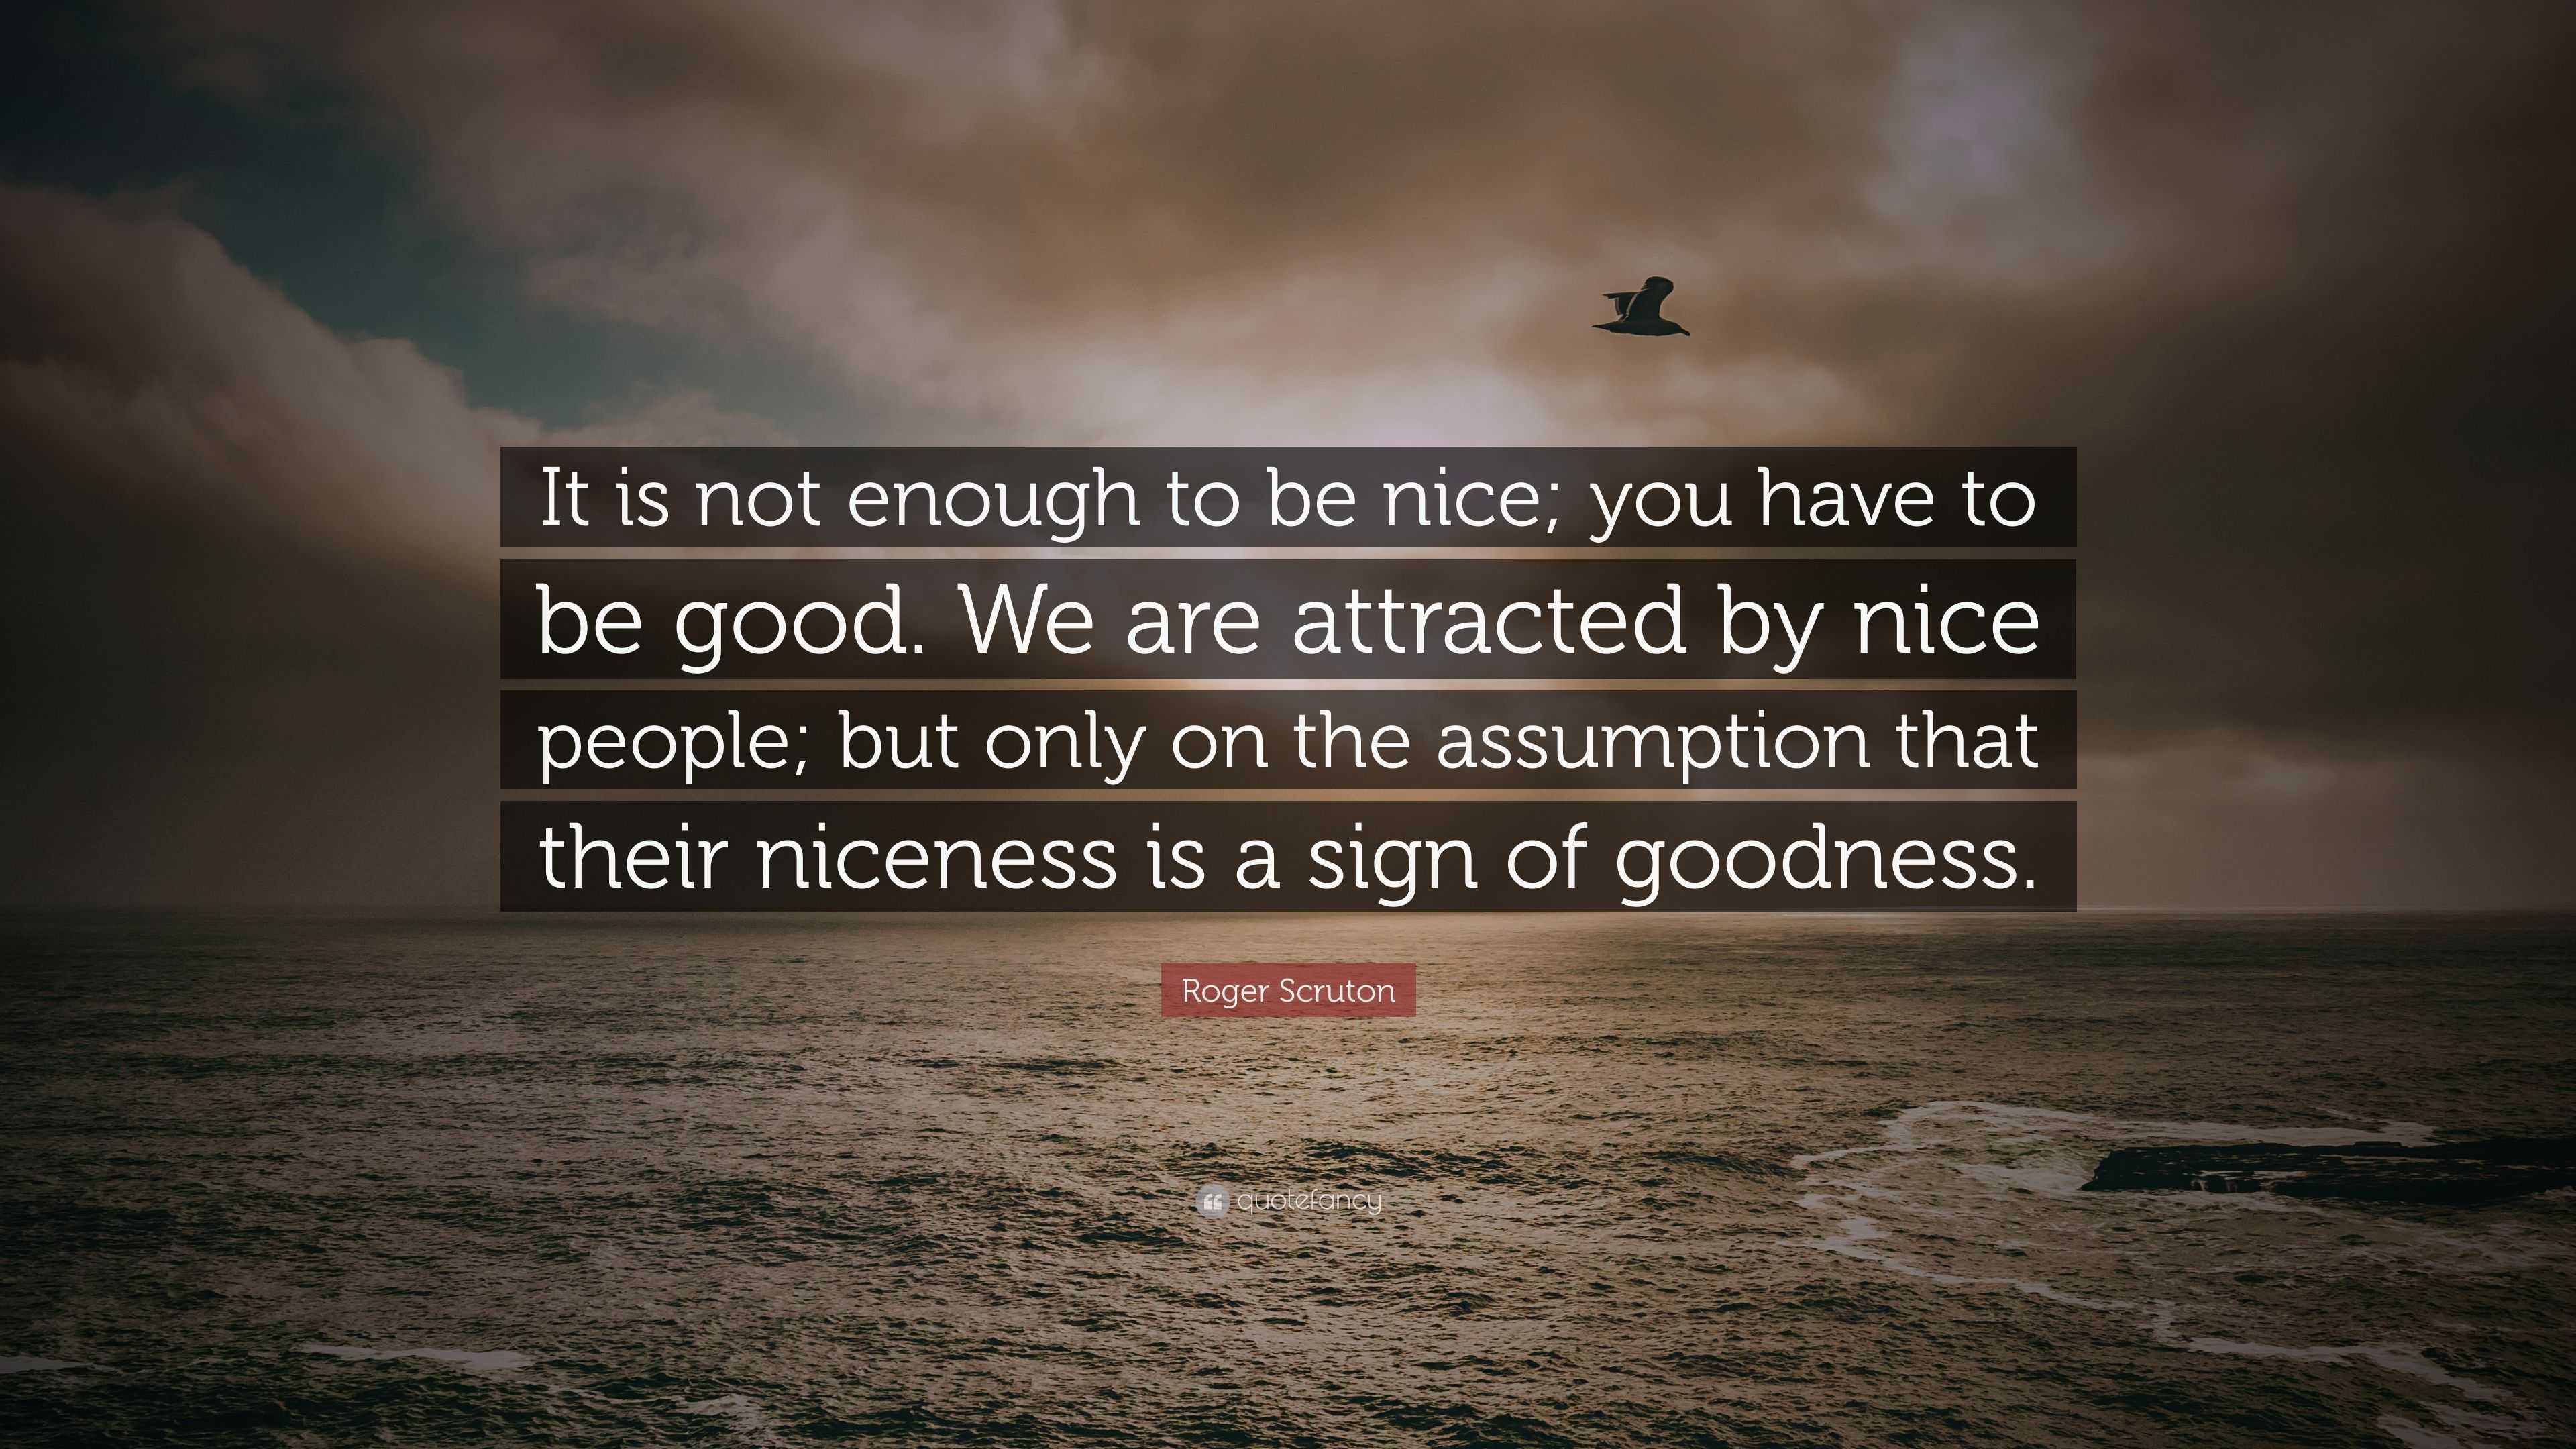 Roger Scruton Quote: “It is not enough to be nice; you have to be